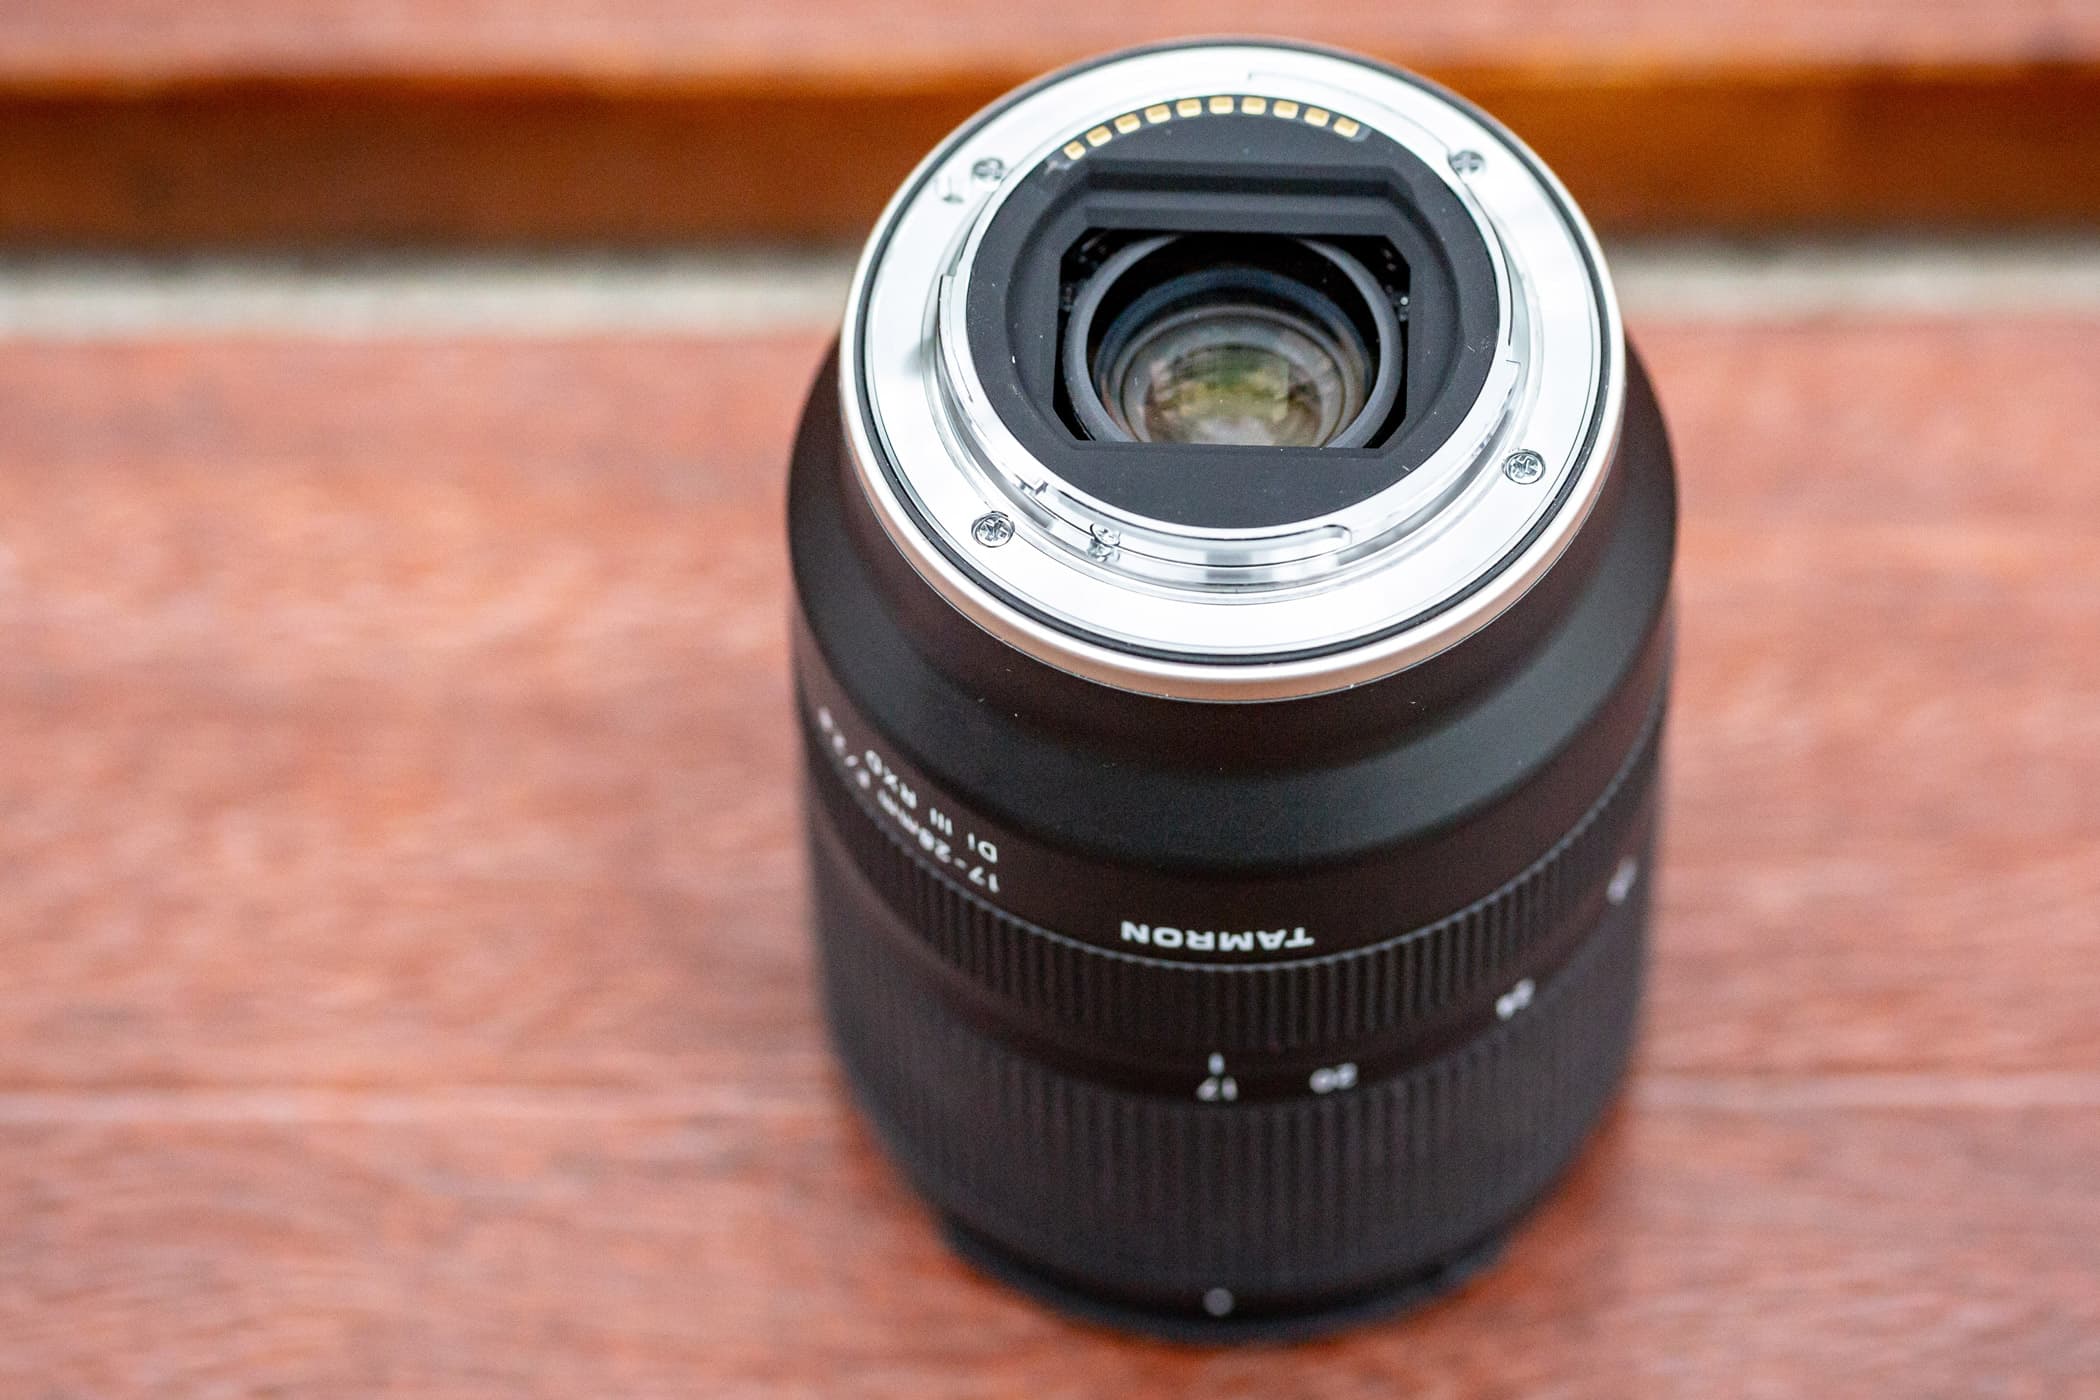 Tamron 17-28mm F/2.8 Di III RXD review - Amateur Photographer